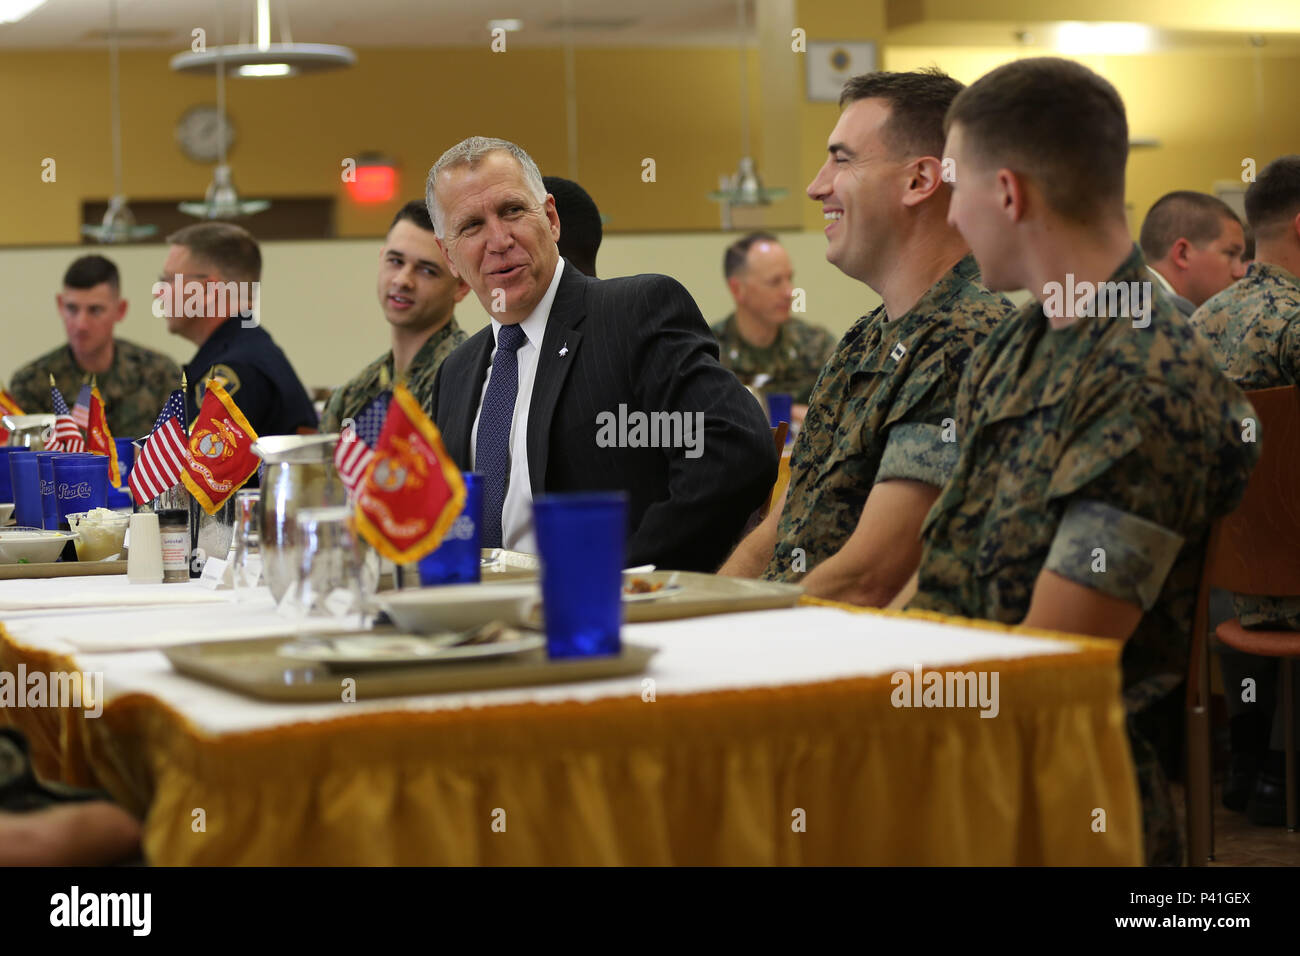 Sen. Thom Tillis shares a meal with Marines at the mess hall during a visit at MCAS Cherry Point, N.C., June 1, 2016. Tillis visited the air station to address the needs and priorities of the base, and assess the Marine Corps’ presence in North Carolina. Tillis also toured Fleet Readiness Center East. Tillis is a North Carolina senator. (U.S. Marine Corps photo by Lance Cpl. Mackenzie Gibson/Released) Stock Photo